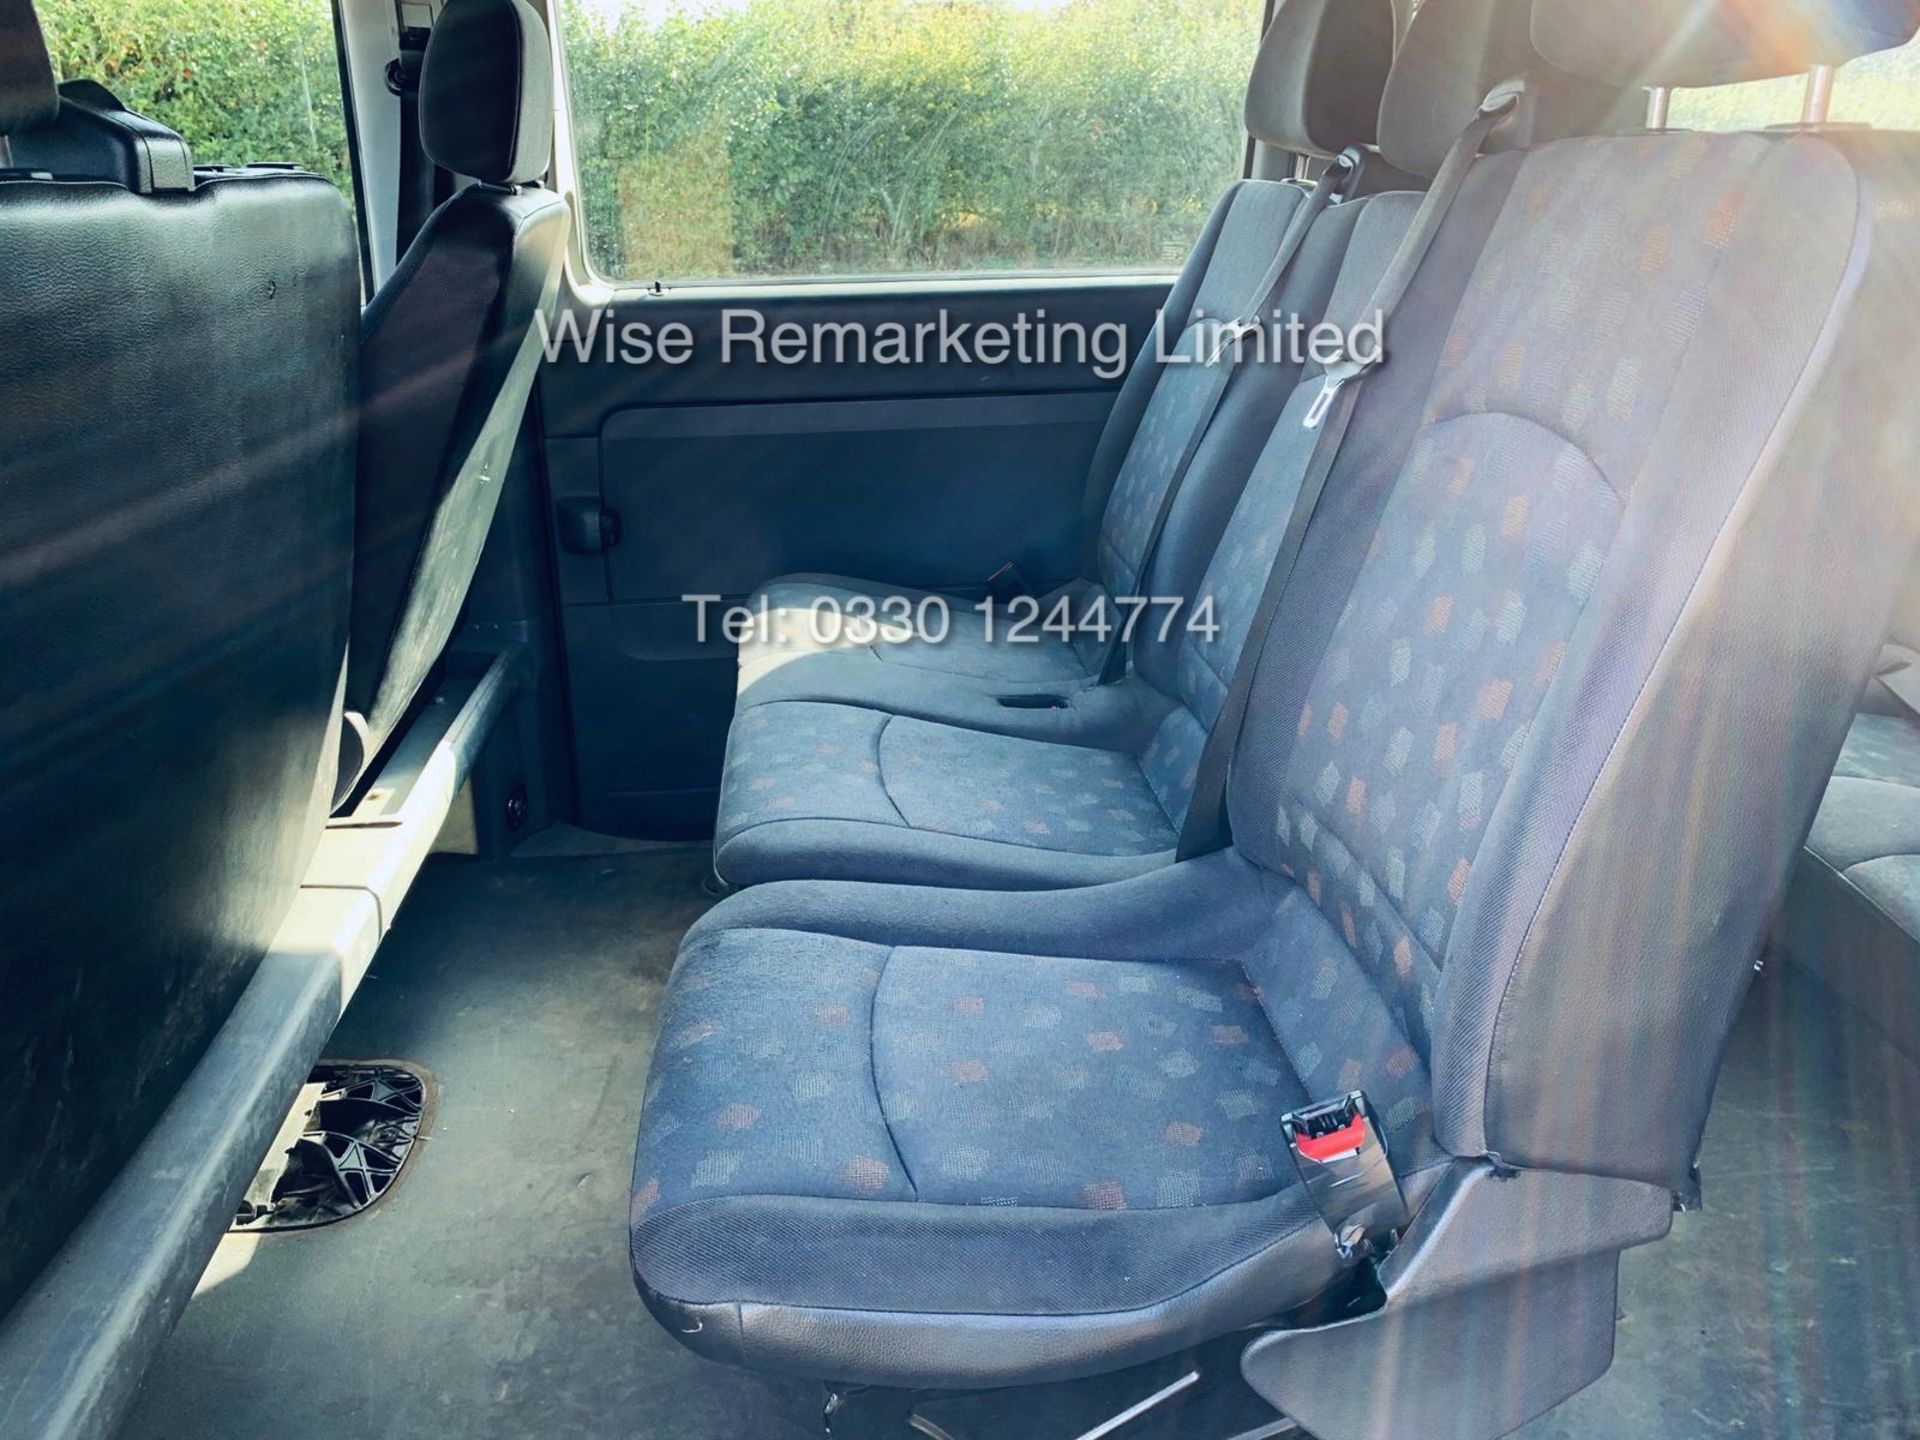 MERCEDES VITO 111 2.1 CDI TRAVELINER **9 SEATER** (2008 08 REG) 1 KEEPER FROM NEW - Image 9 of 19